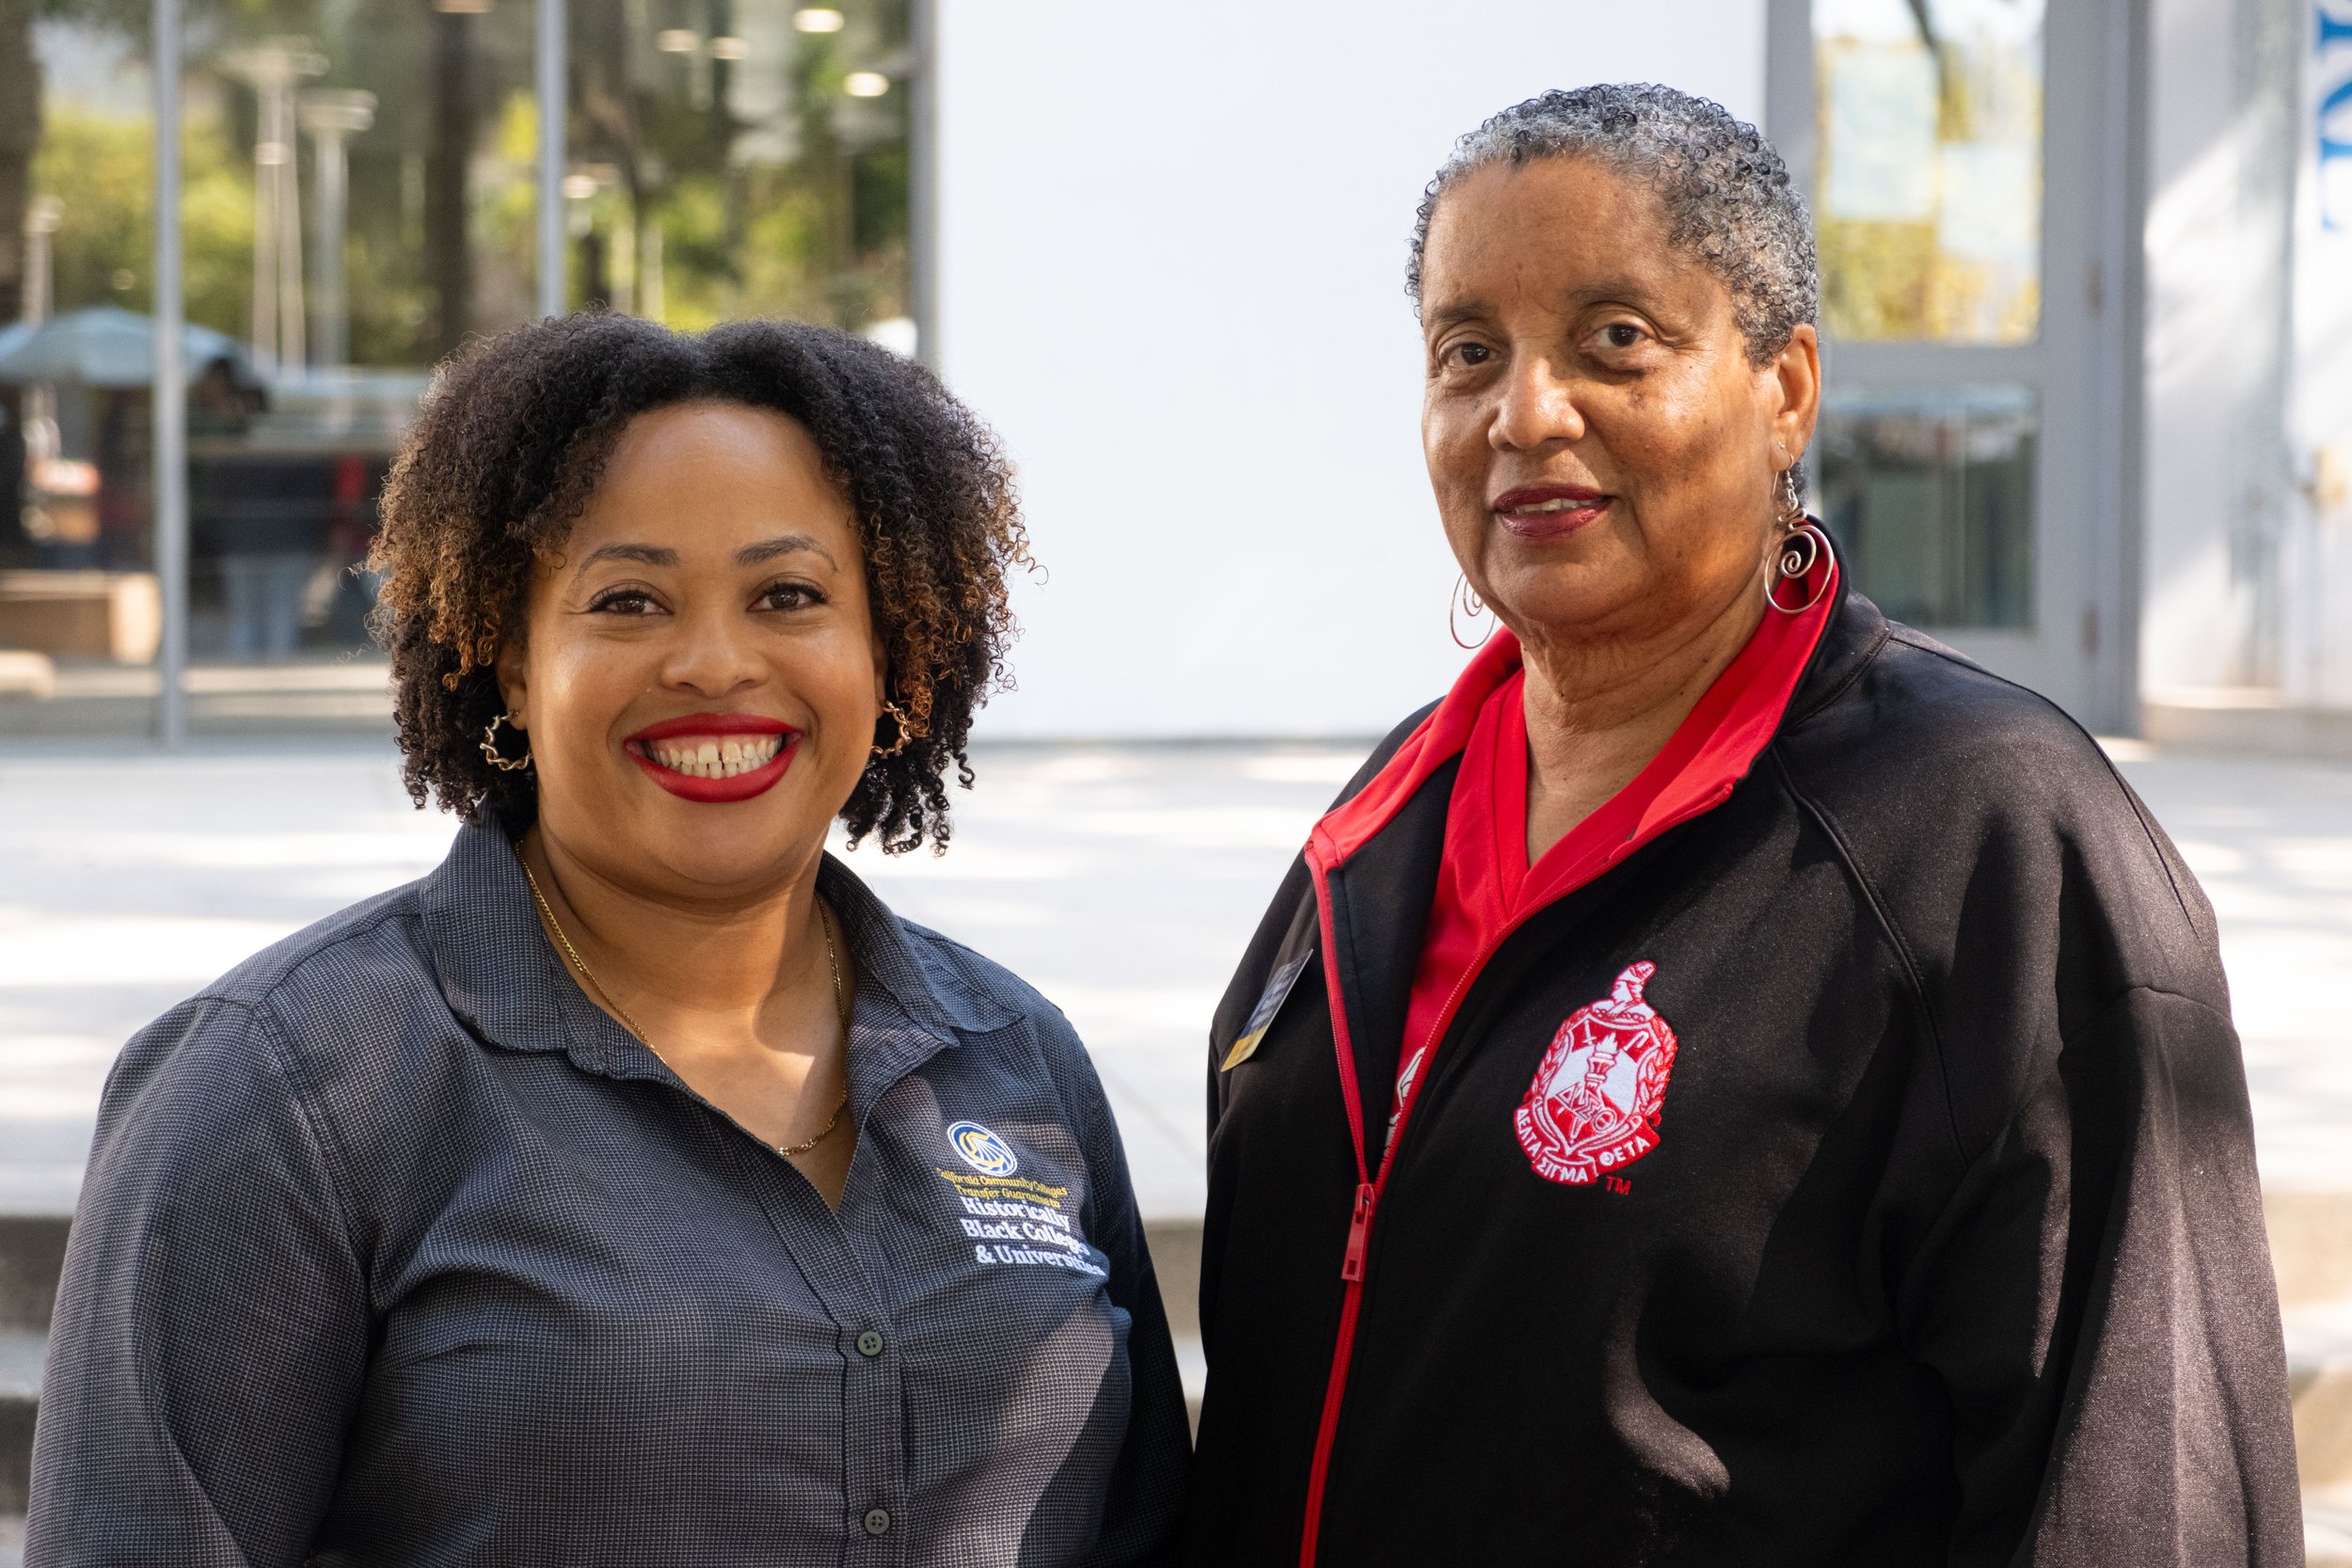  Dr. Arynn Auzout Settle(L) and Dr. Karen McCord(R), organizers of the Historically Black College and Universities Caravan posing for a portrait on Thursday, Oct. 26 at Santa Monica, Calif. (Danilo Perez | The Corsair) 